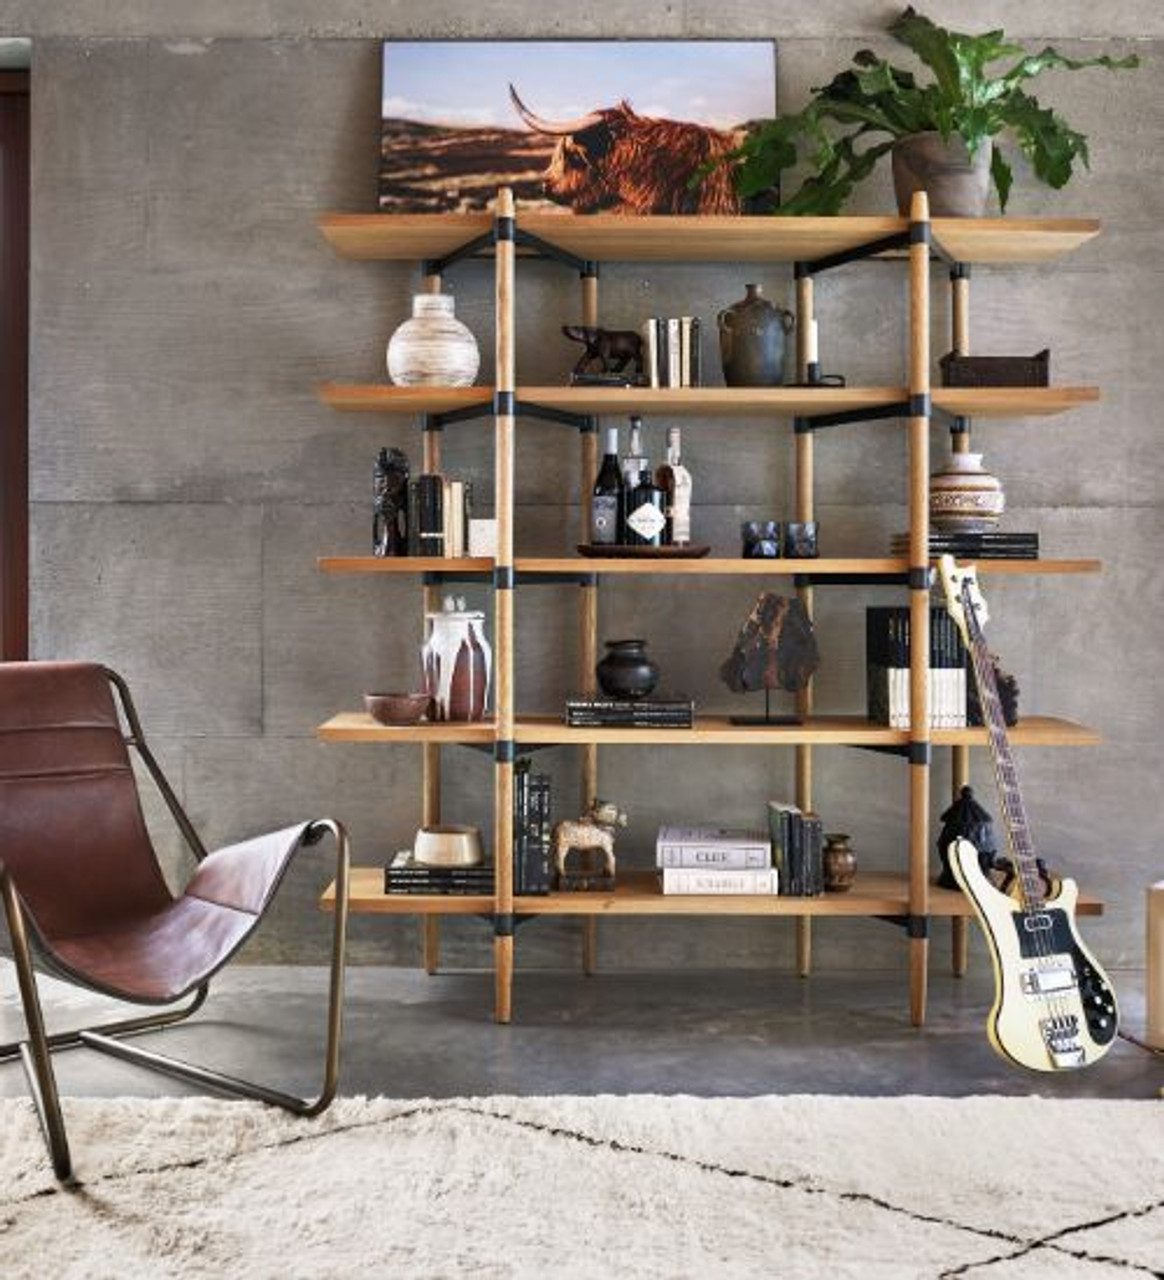 How to Choose a Bookcase?